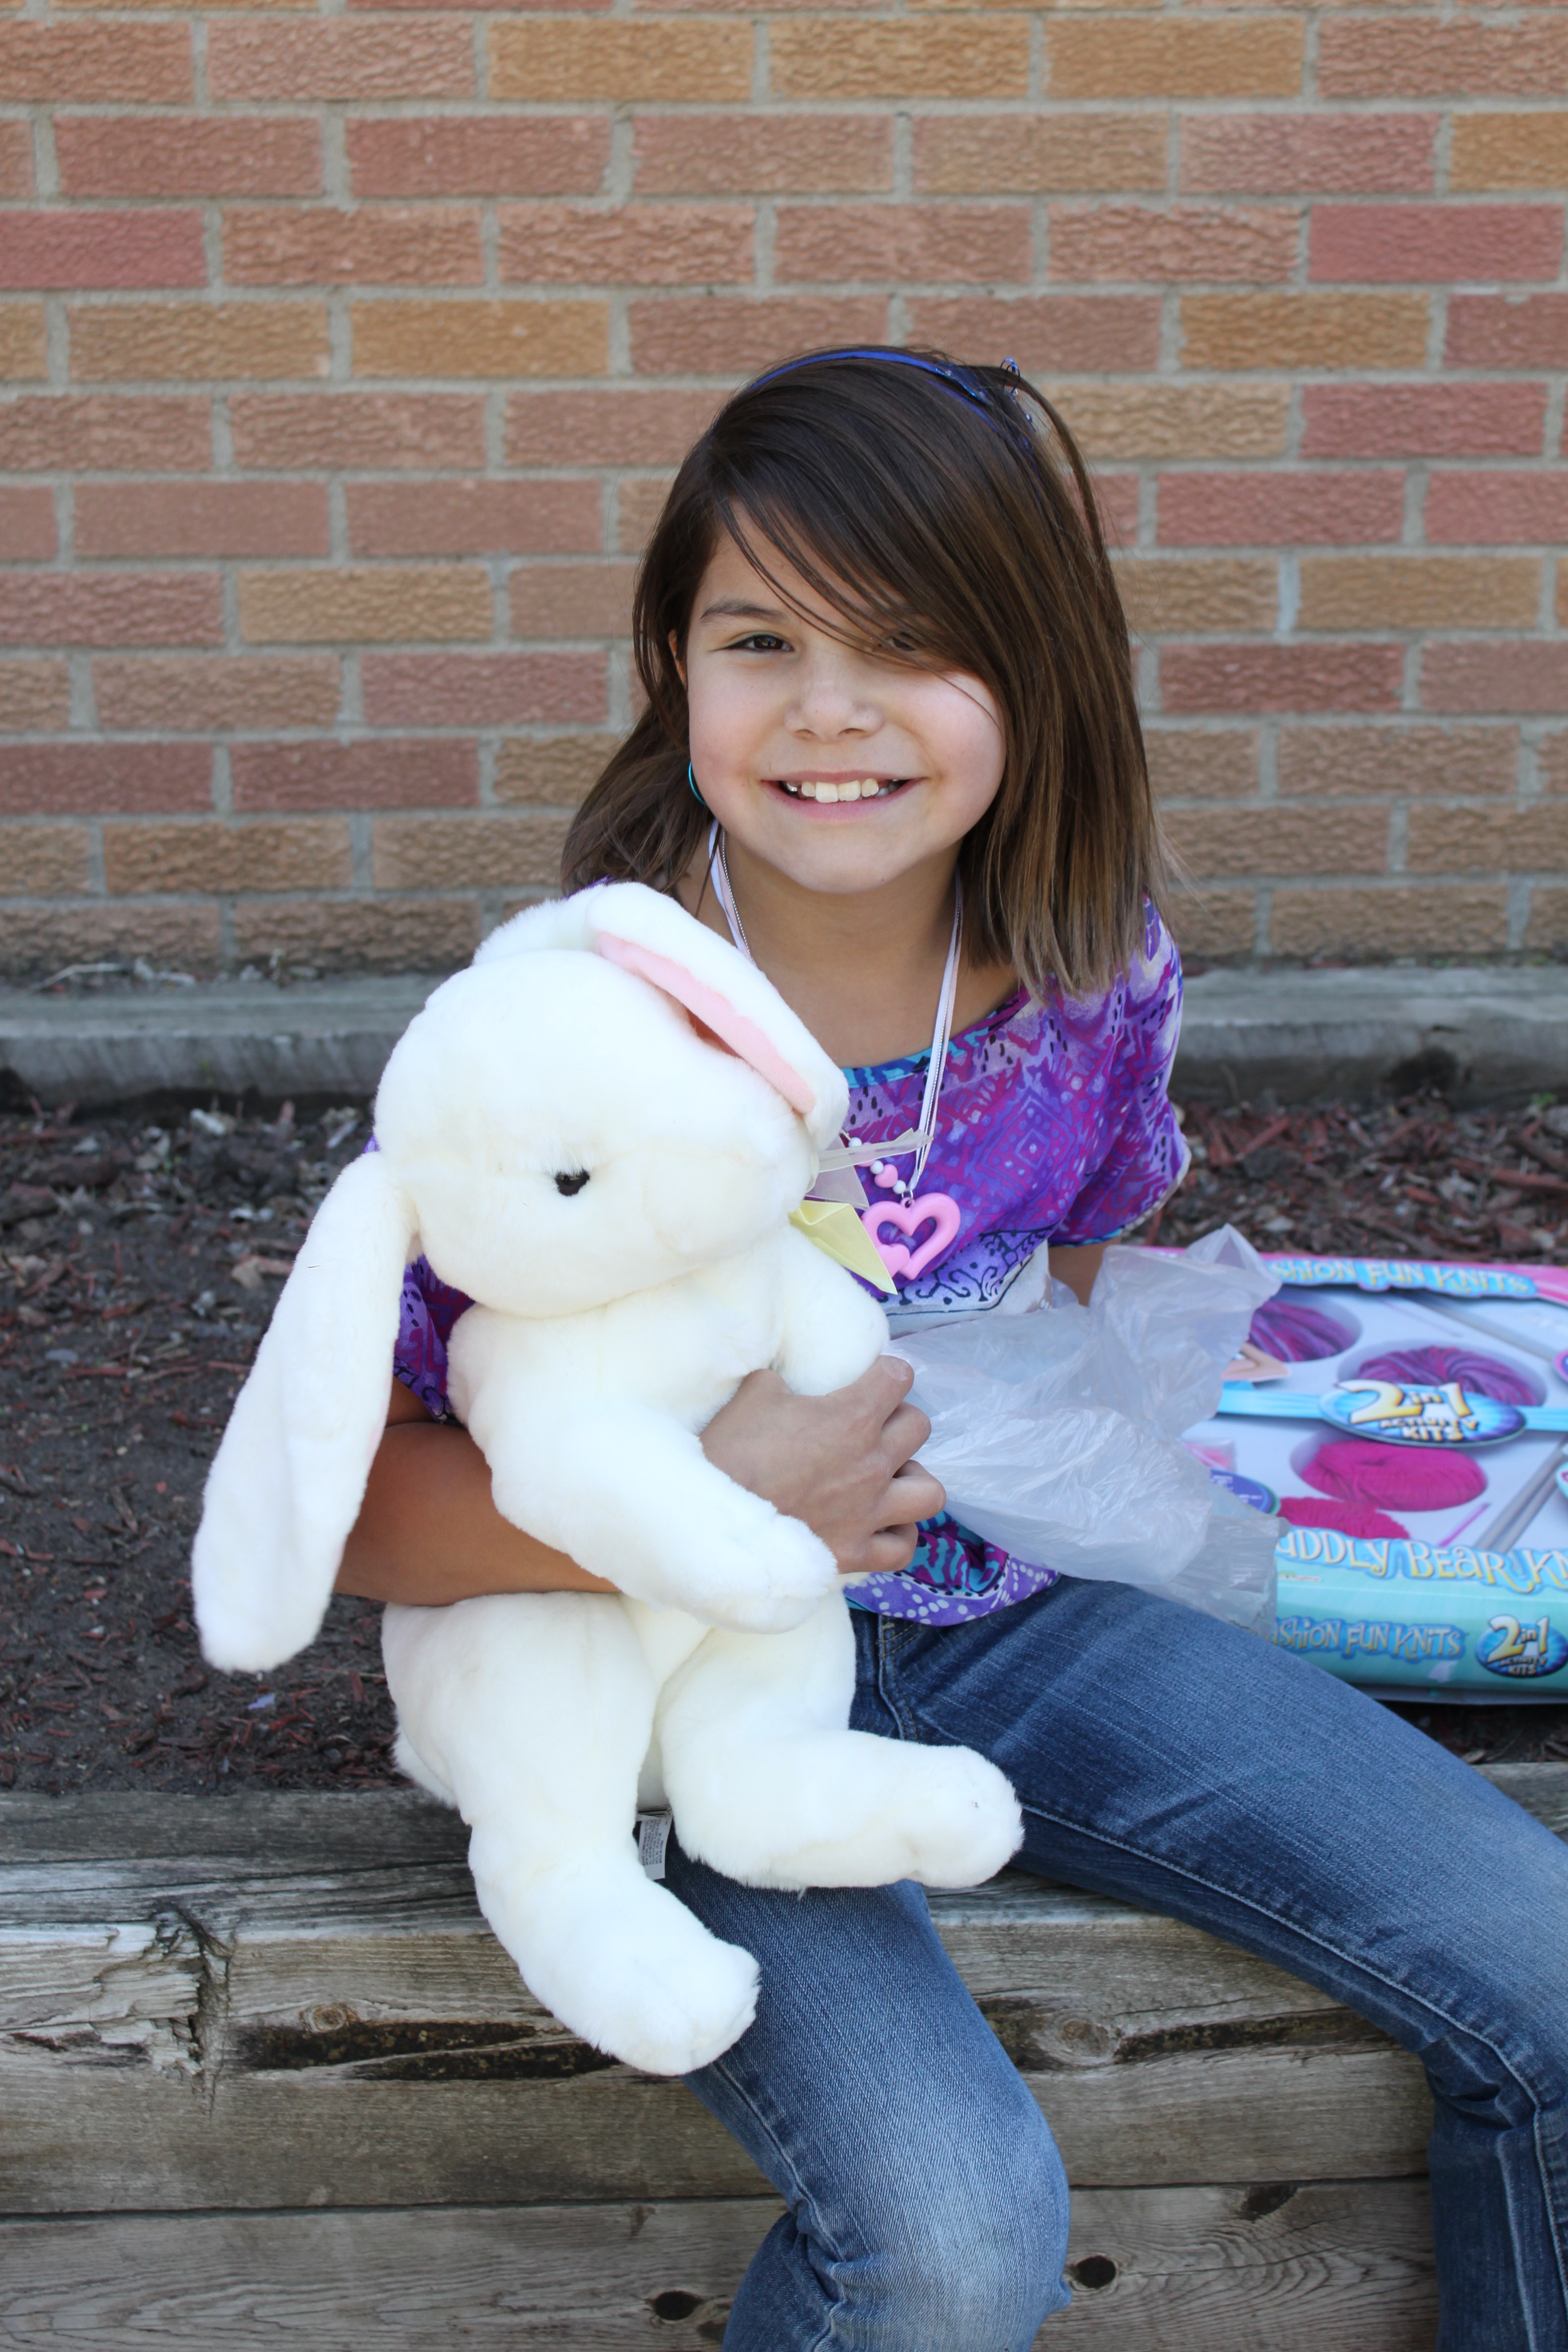 American Indian girl with a stuffed bunny.